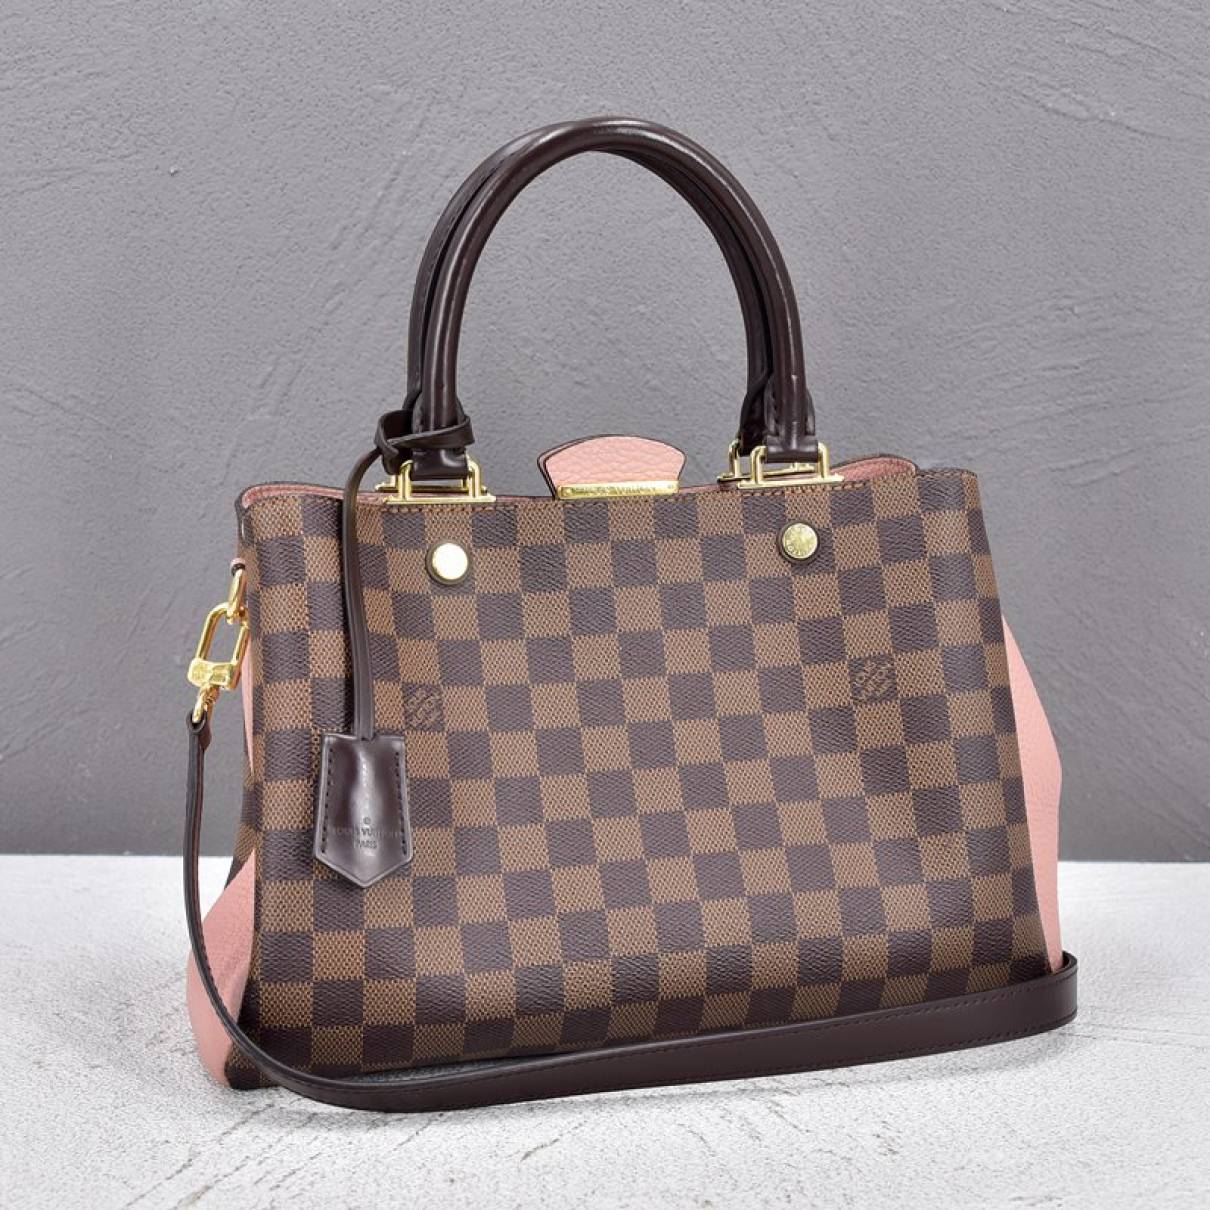 Louis Vuitton - Authenticated Brittany Handbag - Leather Brown for Women, Very Good Condition